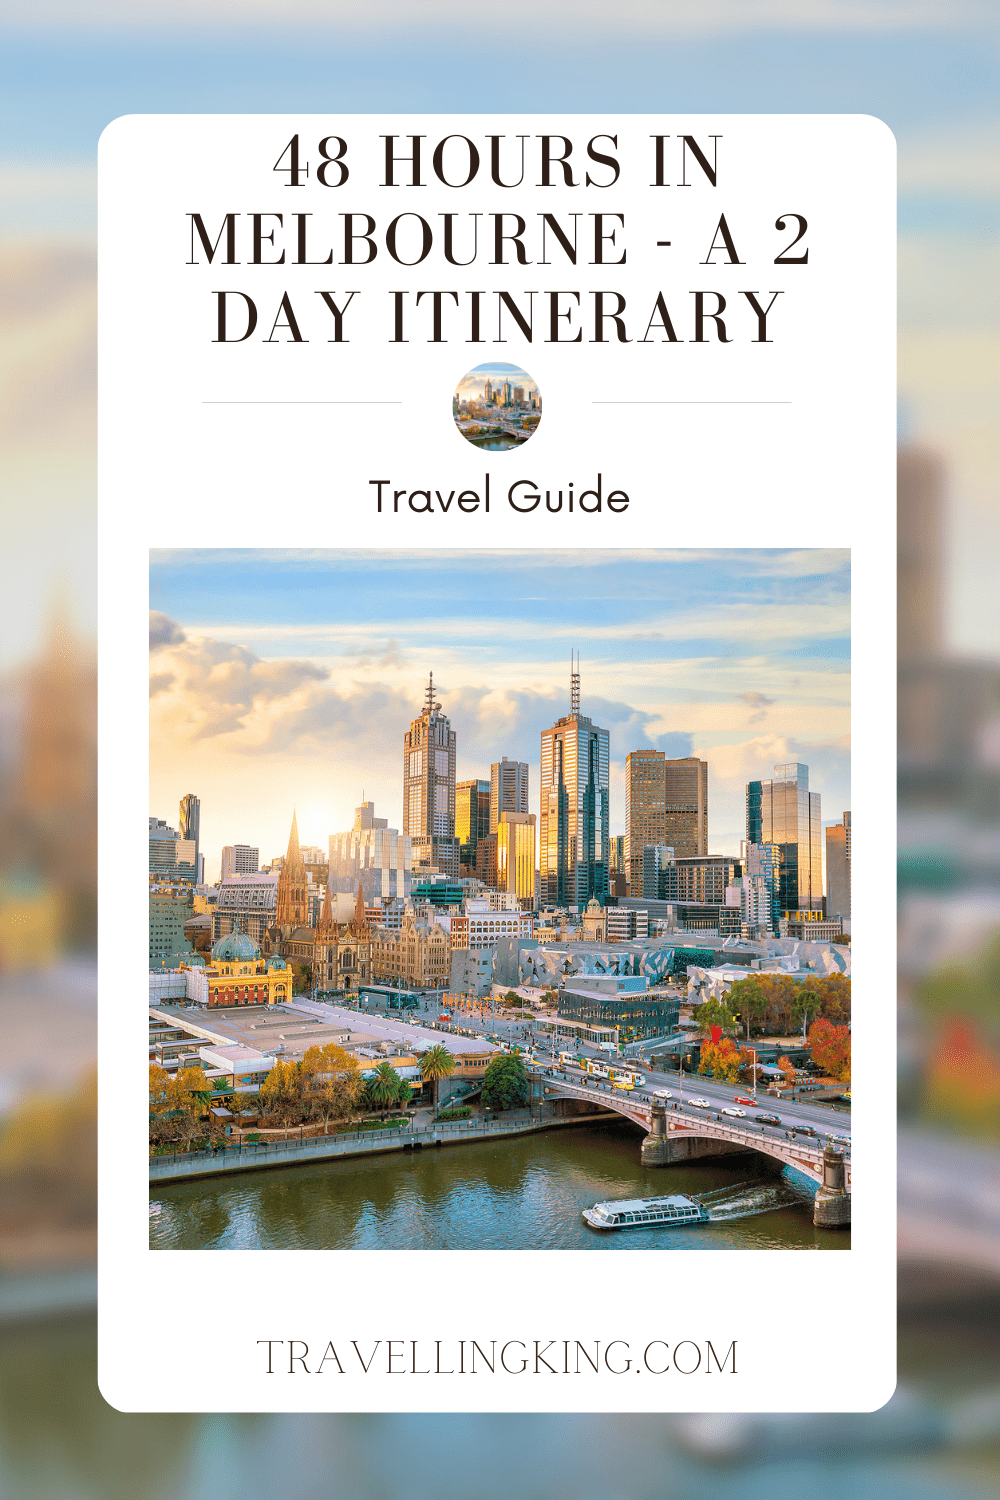 48 hours in Melbourne - A 2 day Itinerary